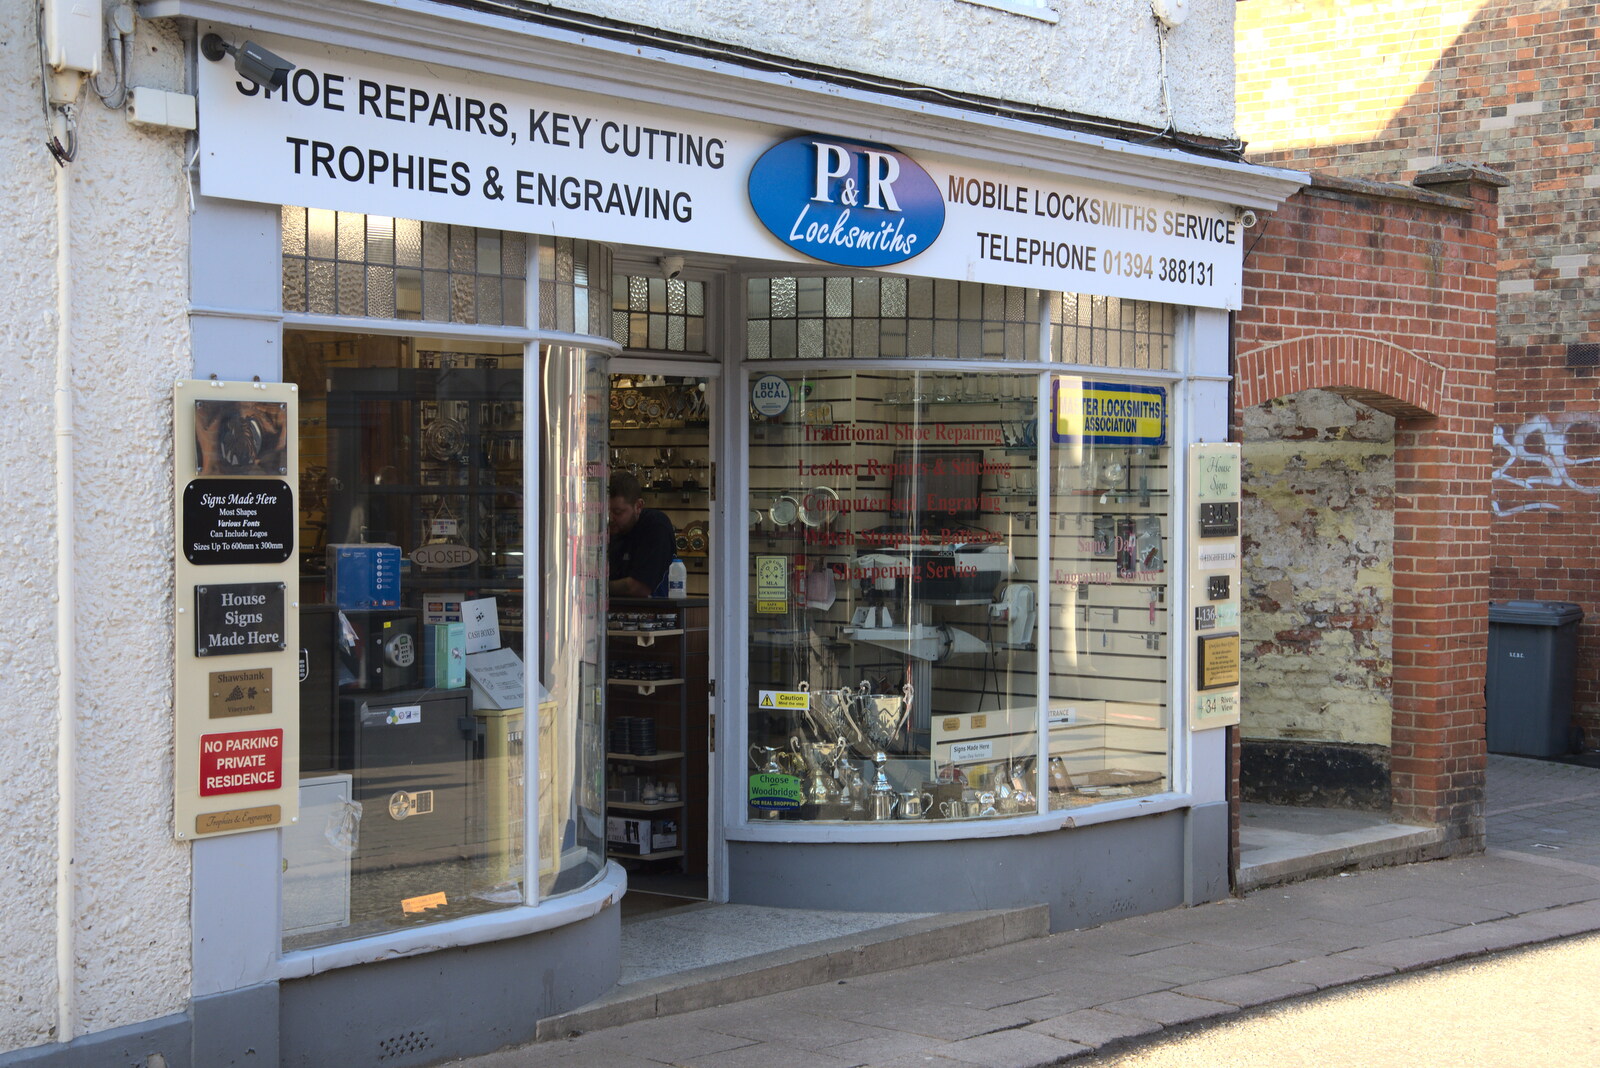 A nice old-fashined locksmiths and engraving shop from A Trip to the Violin Shop, Woodbridge, Suffolk - 12th March 2022